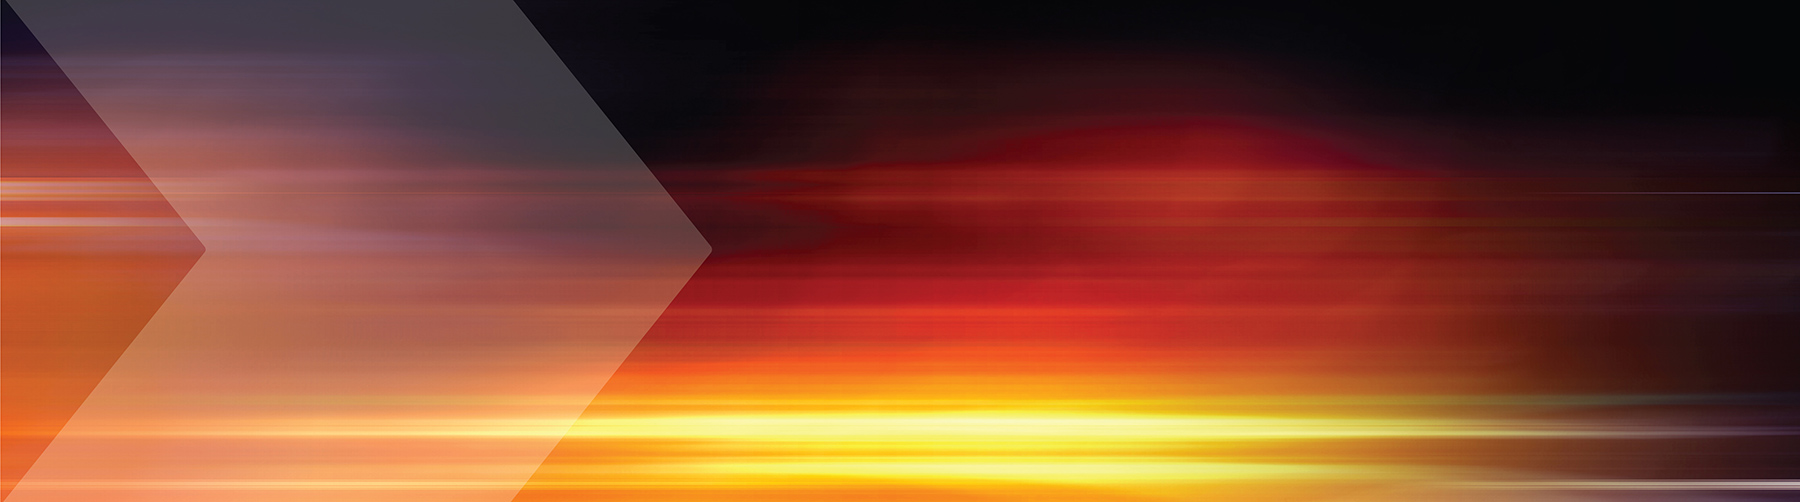 Abstract image of sunset with transparent chevron coming in from right hand side